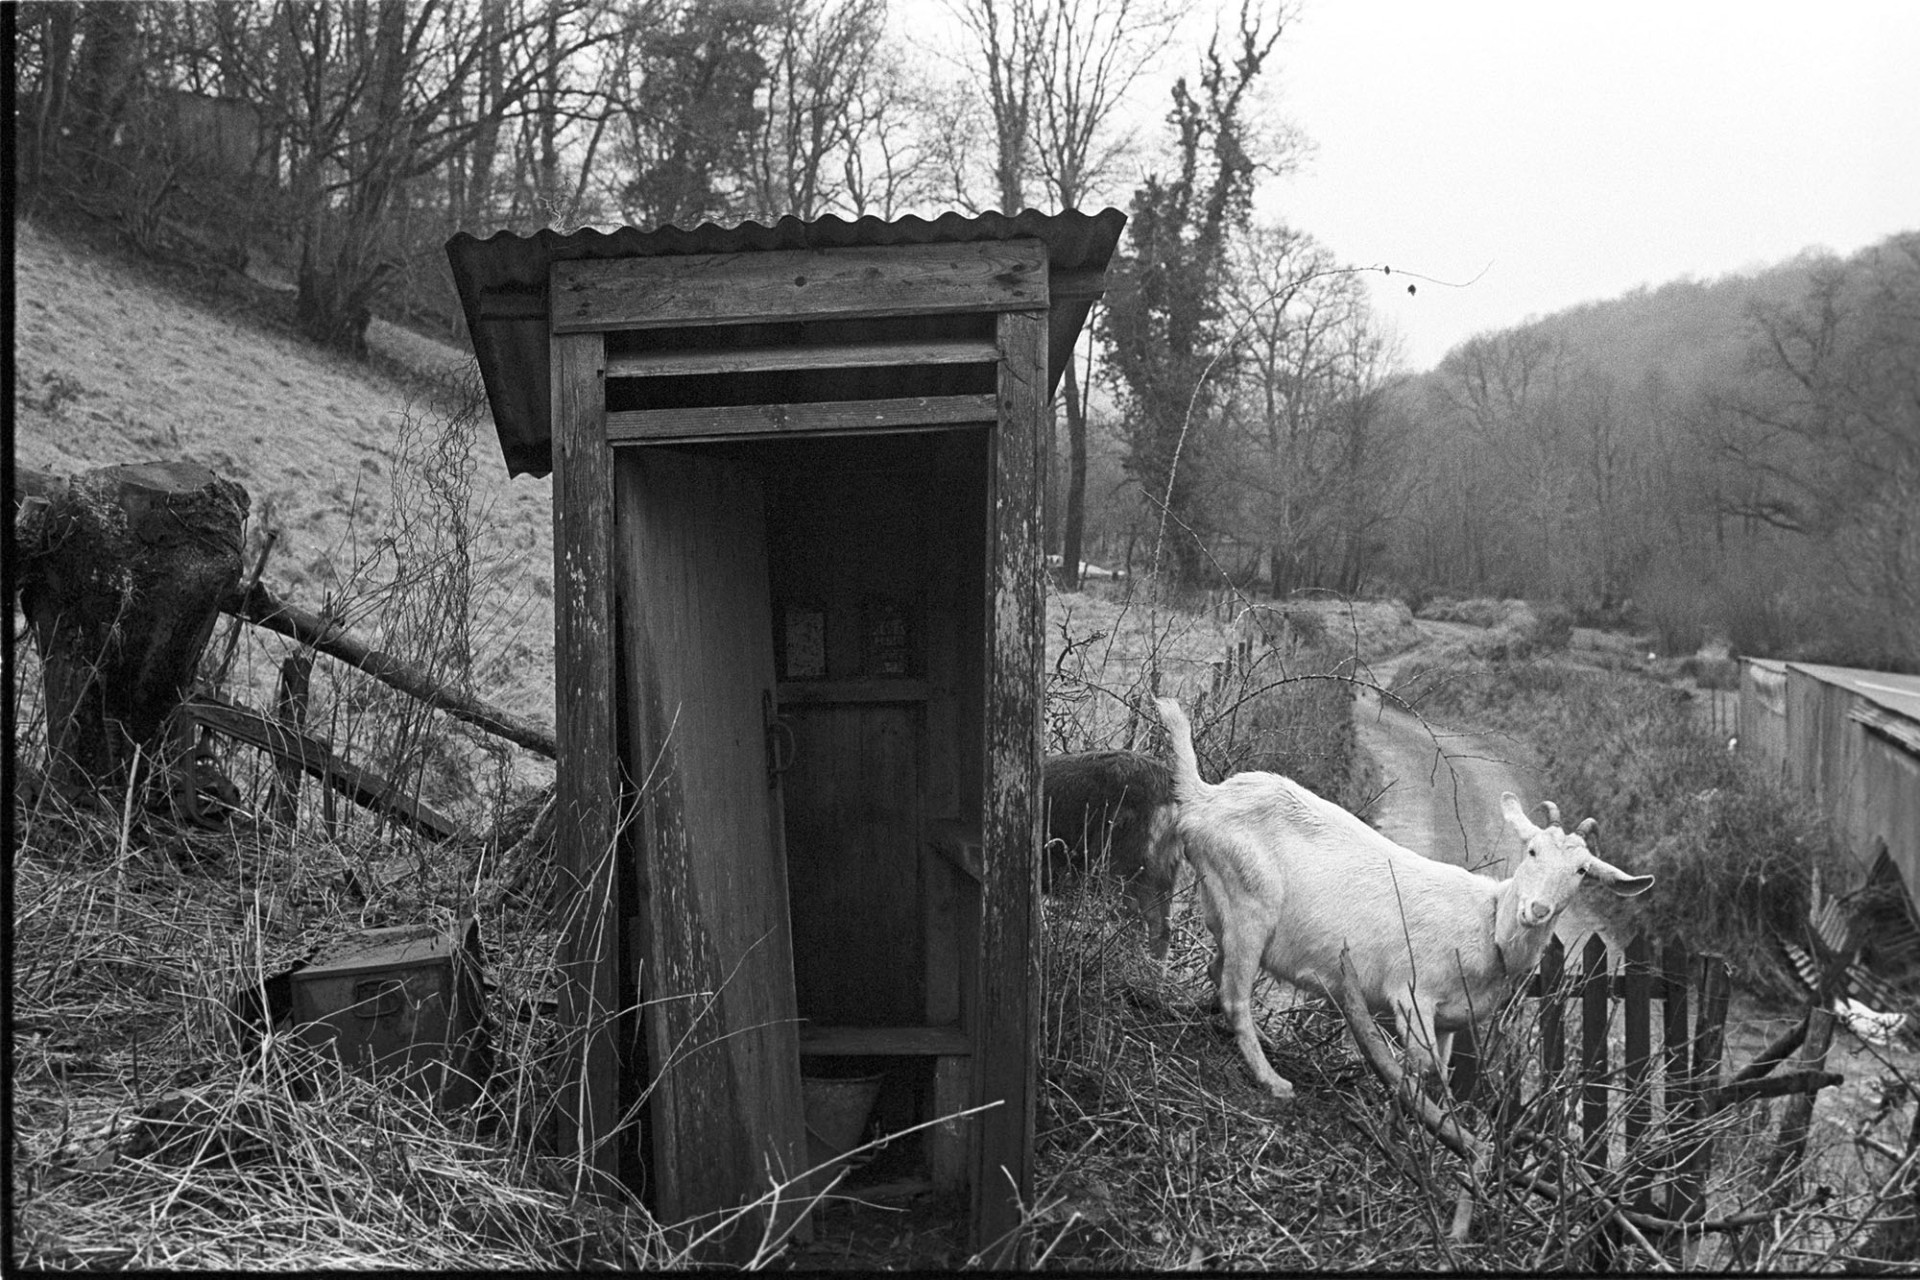 Outside toilet, lavatory with goats. 
[Two goats by an outside toilet at Millhams, Dolton. The toilet is wooden with a corrugated iron roof. In the background a field, lane and wooded area is visible.]